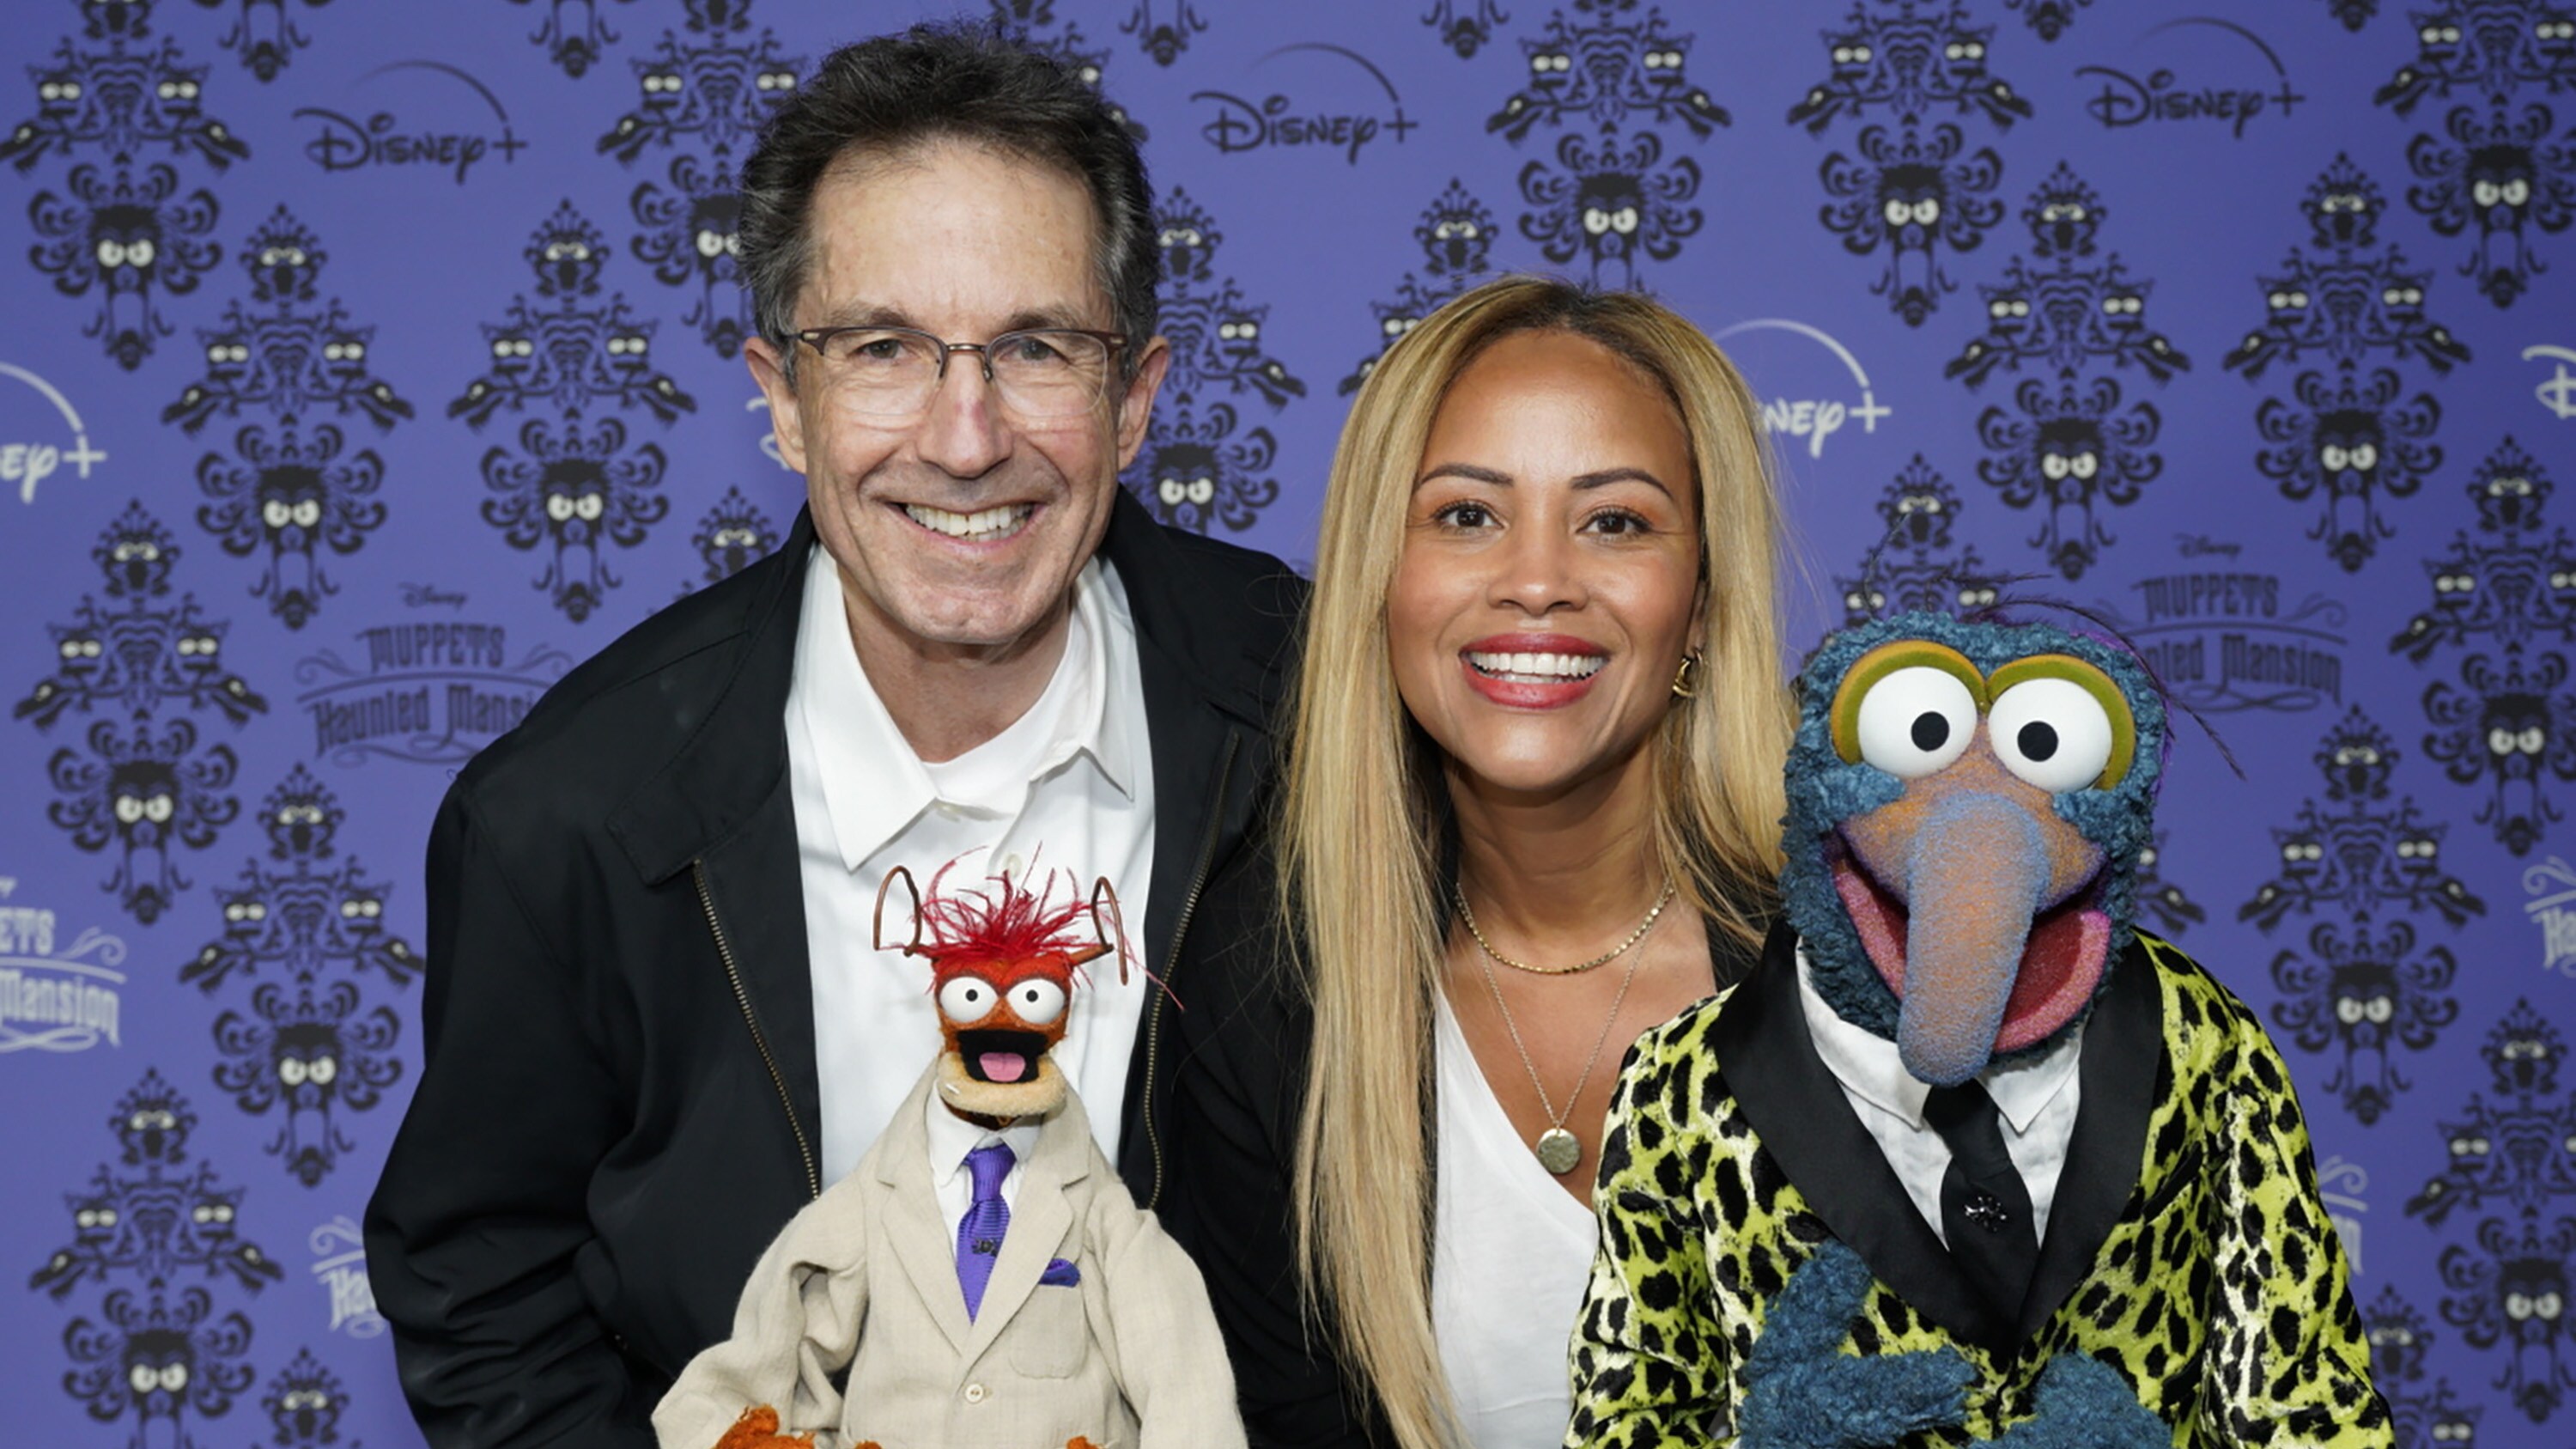 MUPPETS HAUNTED MANSION - Stars of The Muppets first-ever Halloween special "Muppets Haunted Mansion" attended the Drive-In Premiere Event at West Los Angeles College, Thursday, October 7. "Muppets Haunted Mansion" is available to stream Friday, October 8 on Disney+. (Disney/Jacqueline Jones) PEPE THE KING PRAWN, GARY MARSH (PRESIDENT & CCO, DISNEY BRANDED TELEVISION), AYO DAVIS (PRESIDENT, DISNEY BRANDED TELEVISION), GONZO